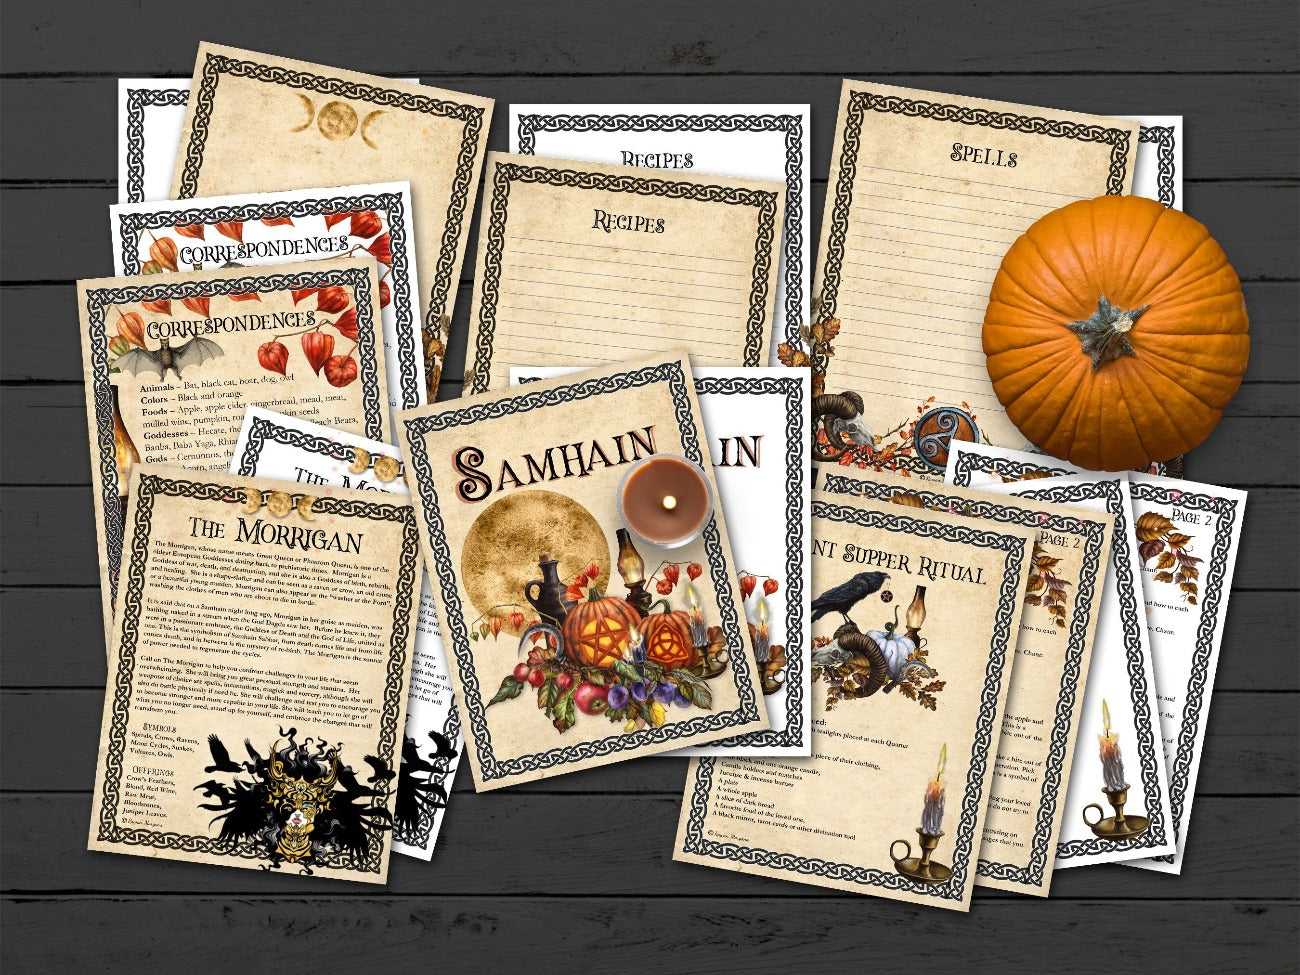 Samhain Front Page, Lined Recipes page, Lined spells page, blank page, The Morrigan and Silient Supper ritual pages are on a black wooden background.